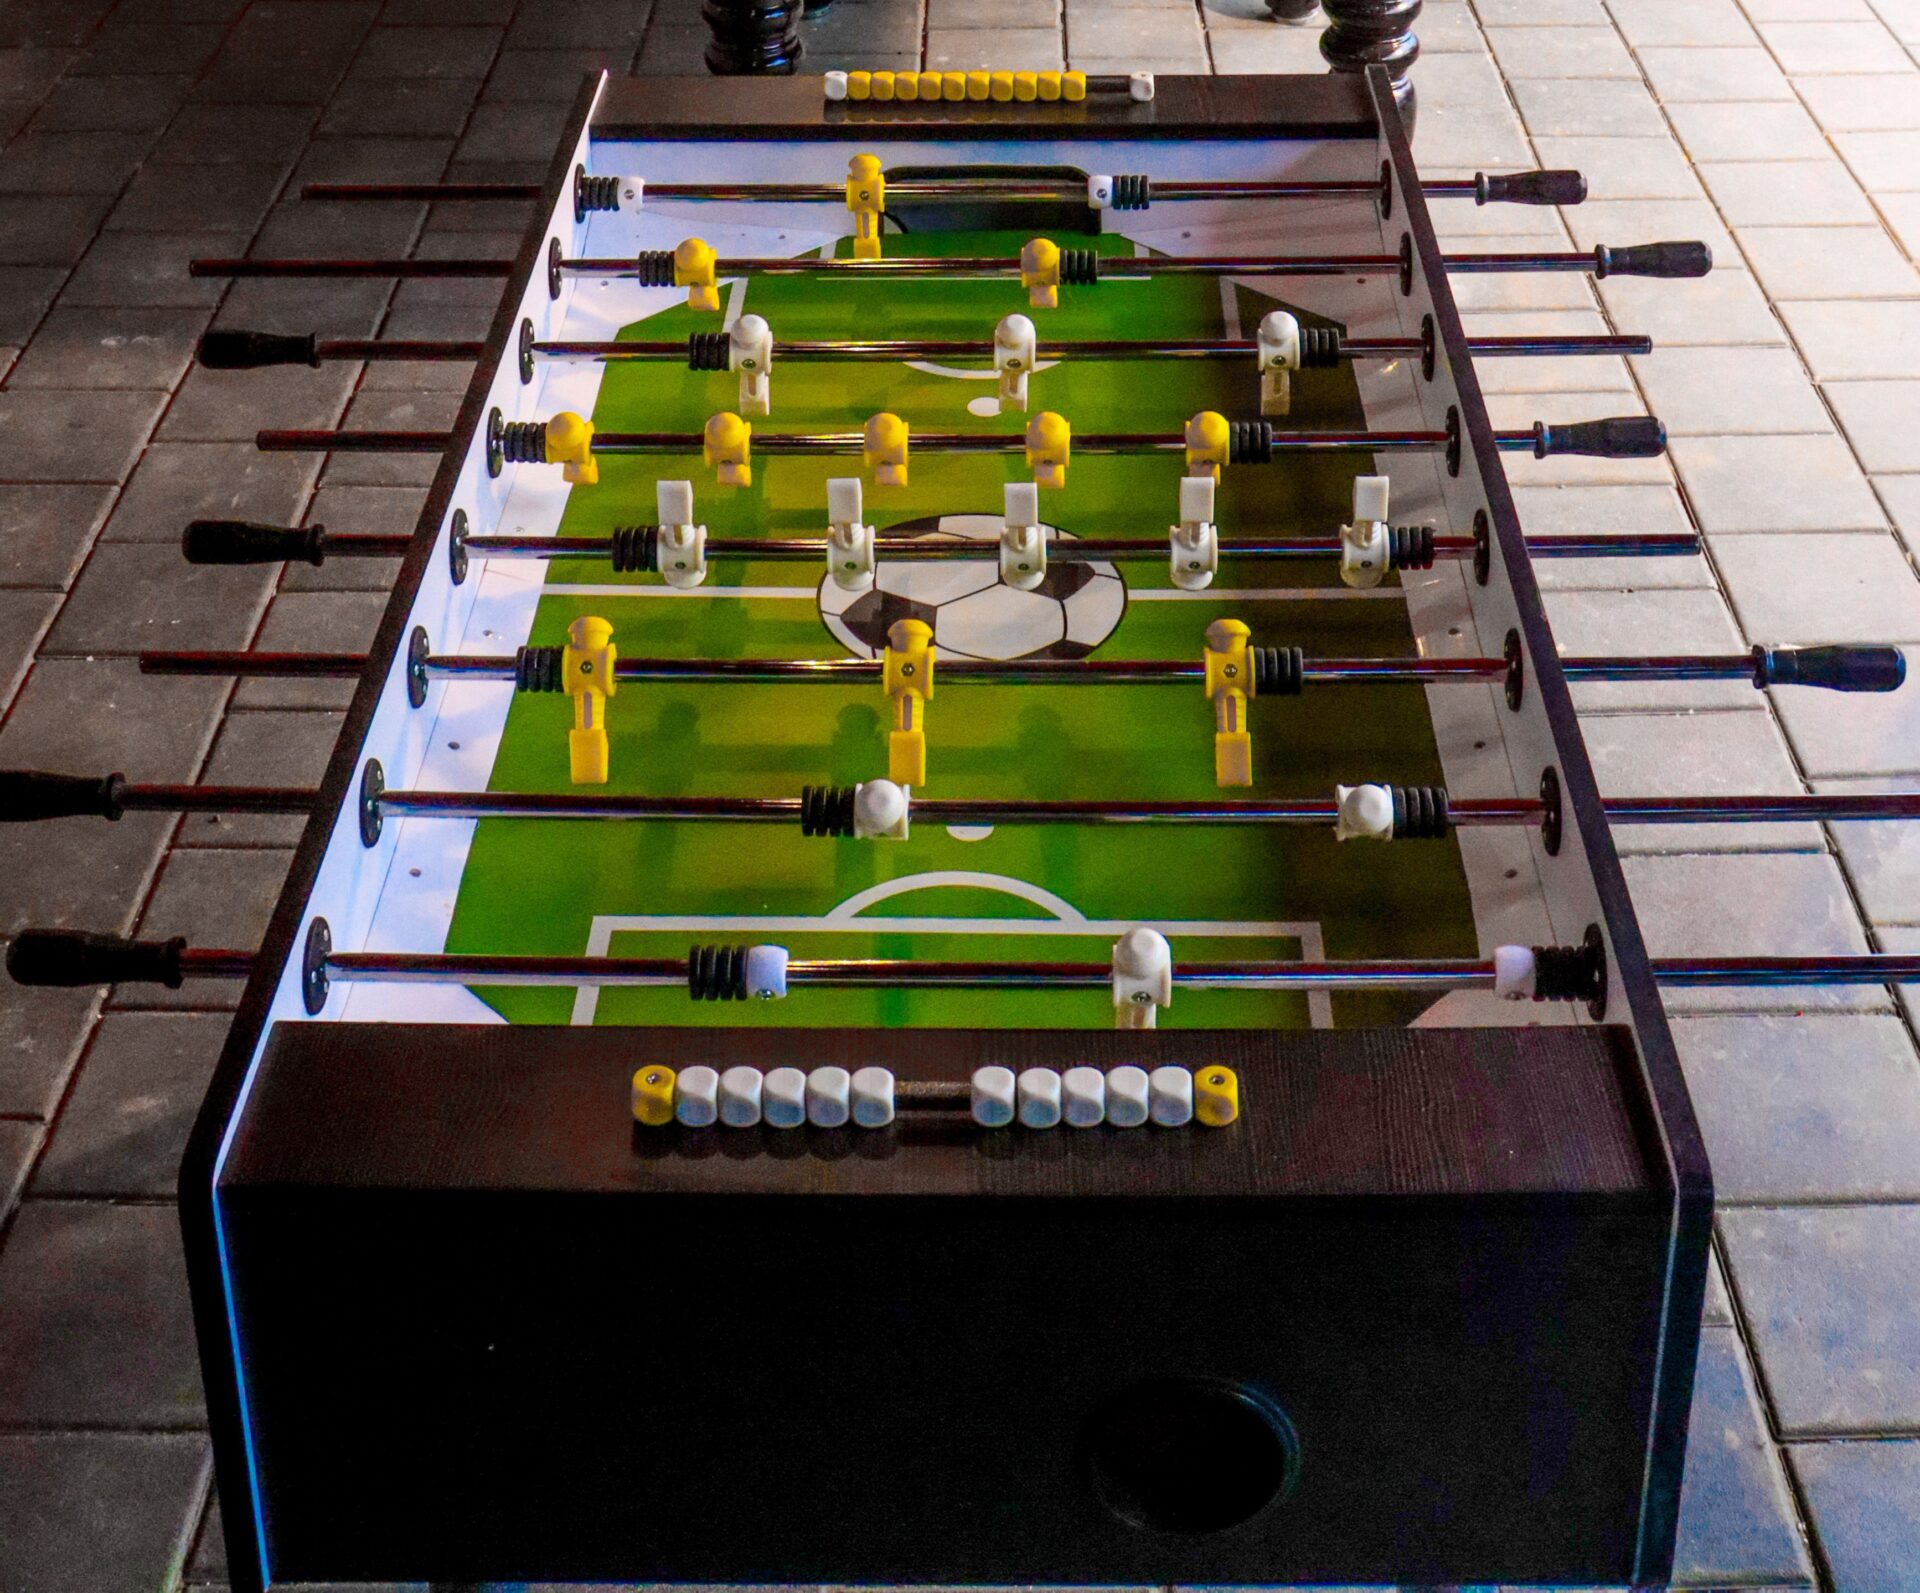 foosball table game at co-working space